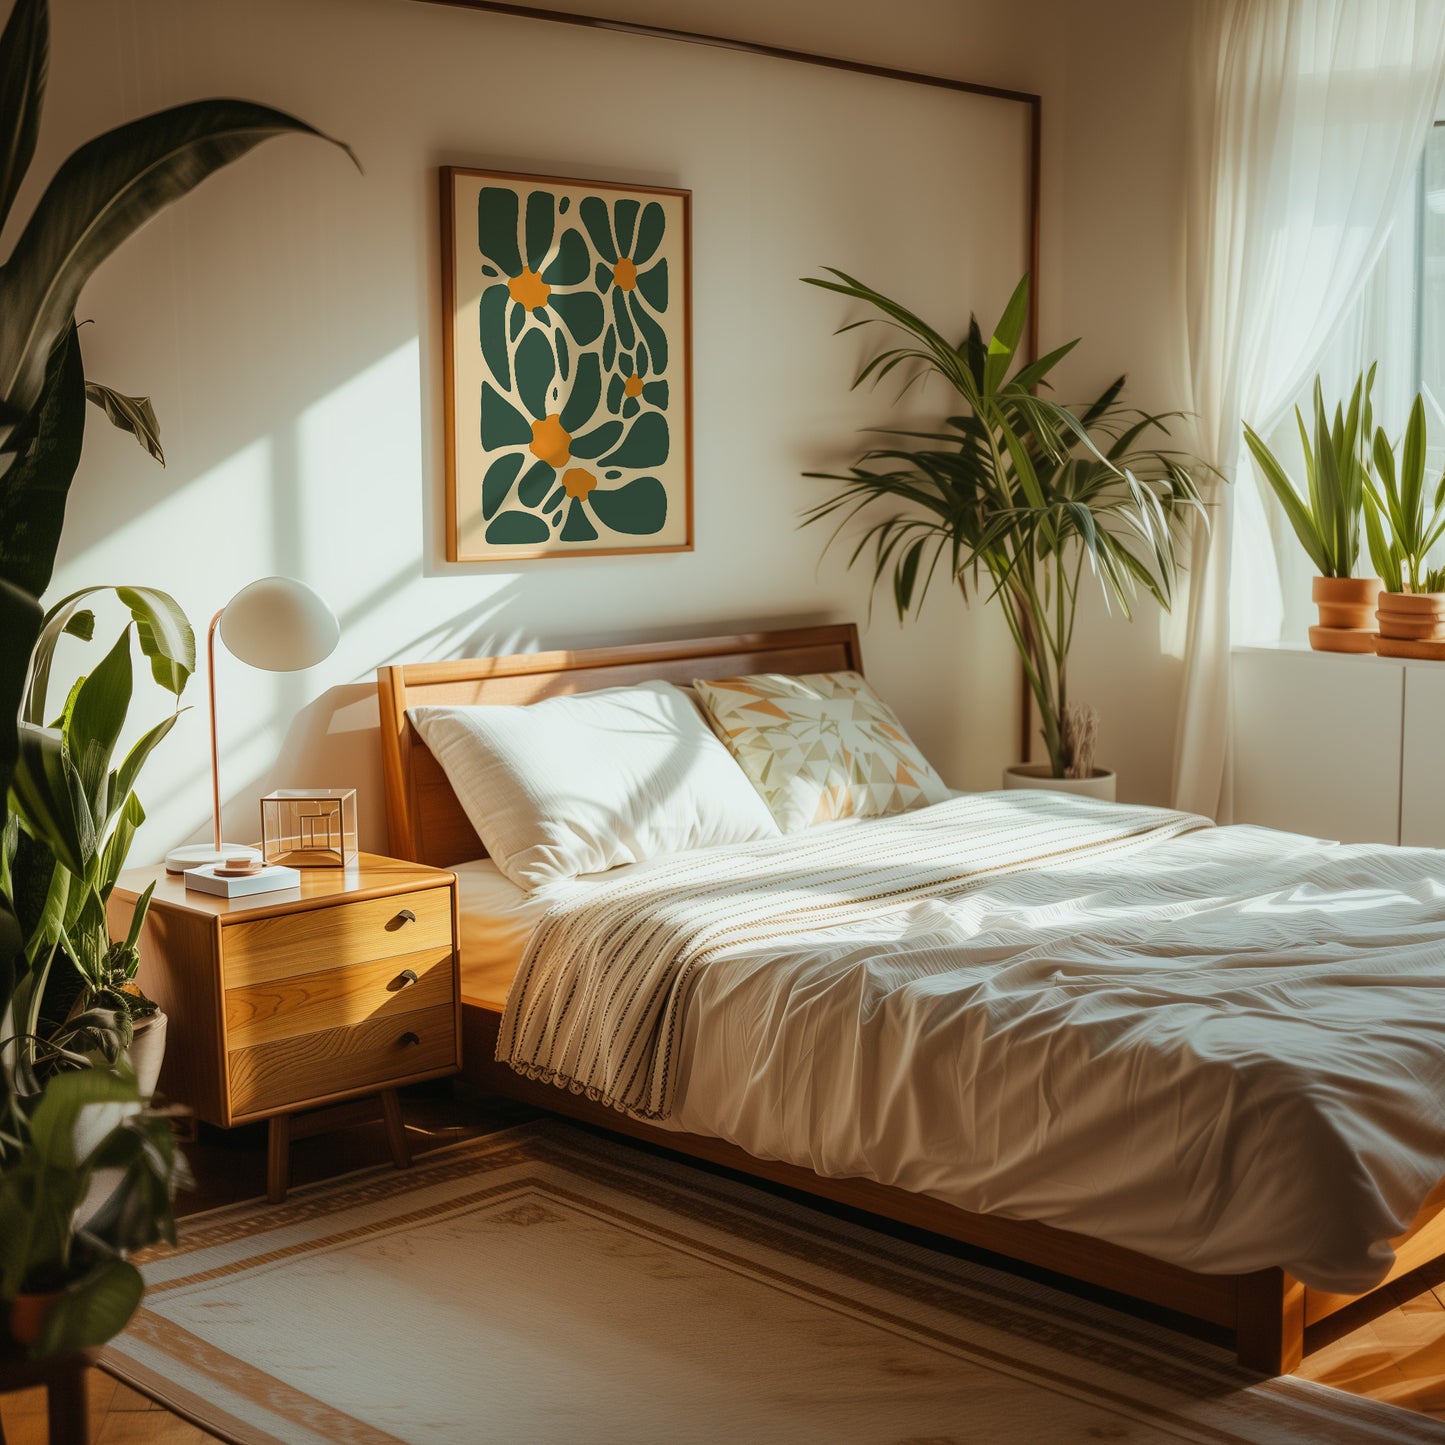 Cozy bedroom with a wooden bed, side table, and plant decorations in sunlight.